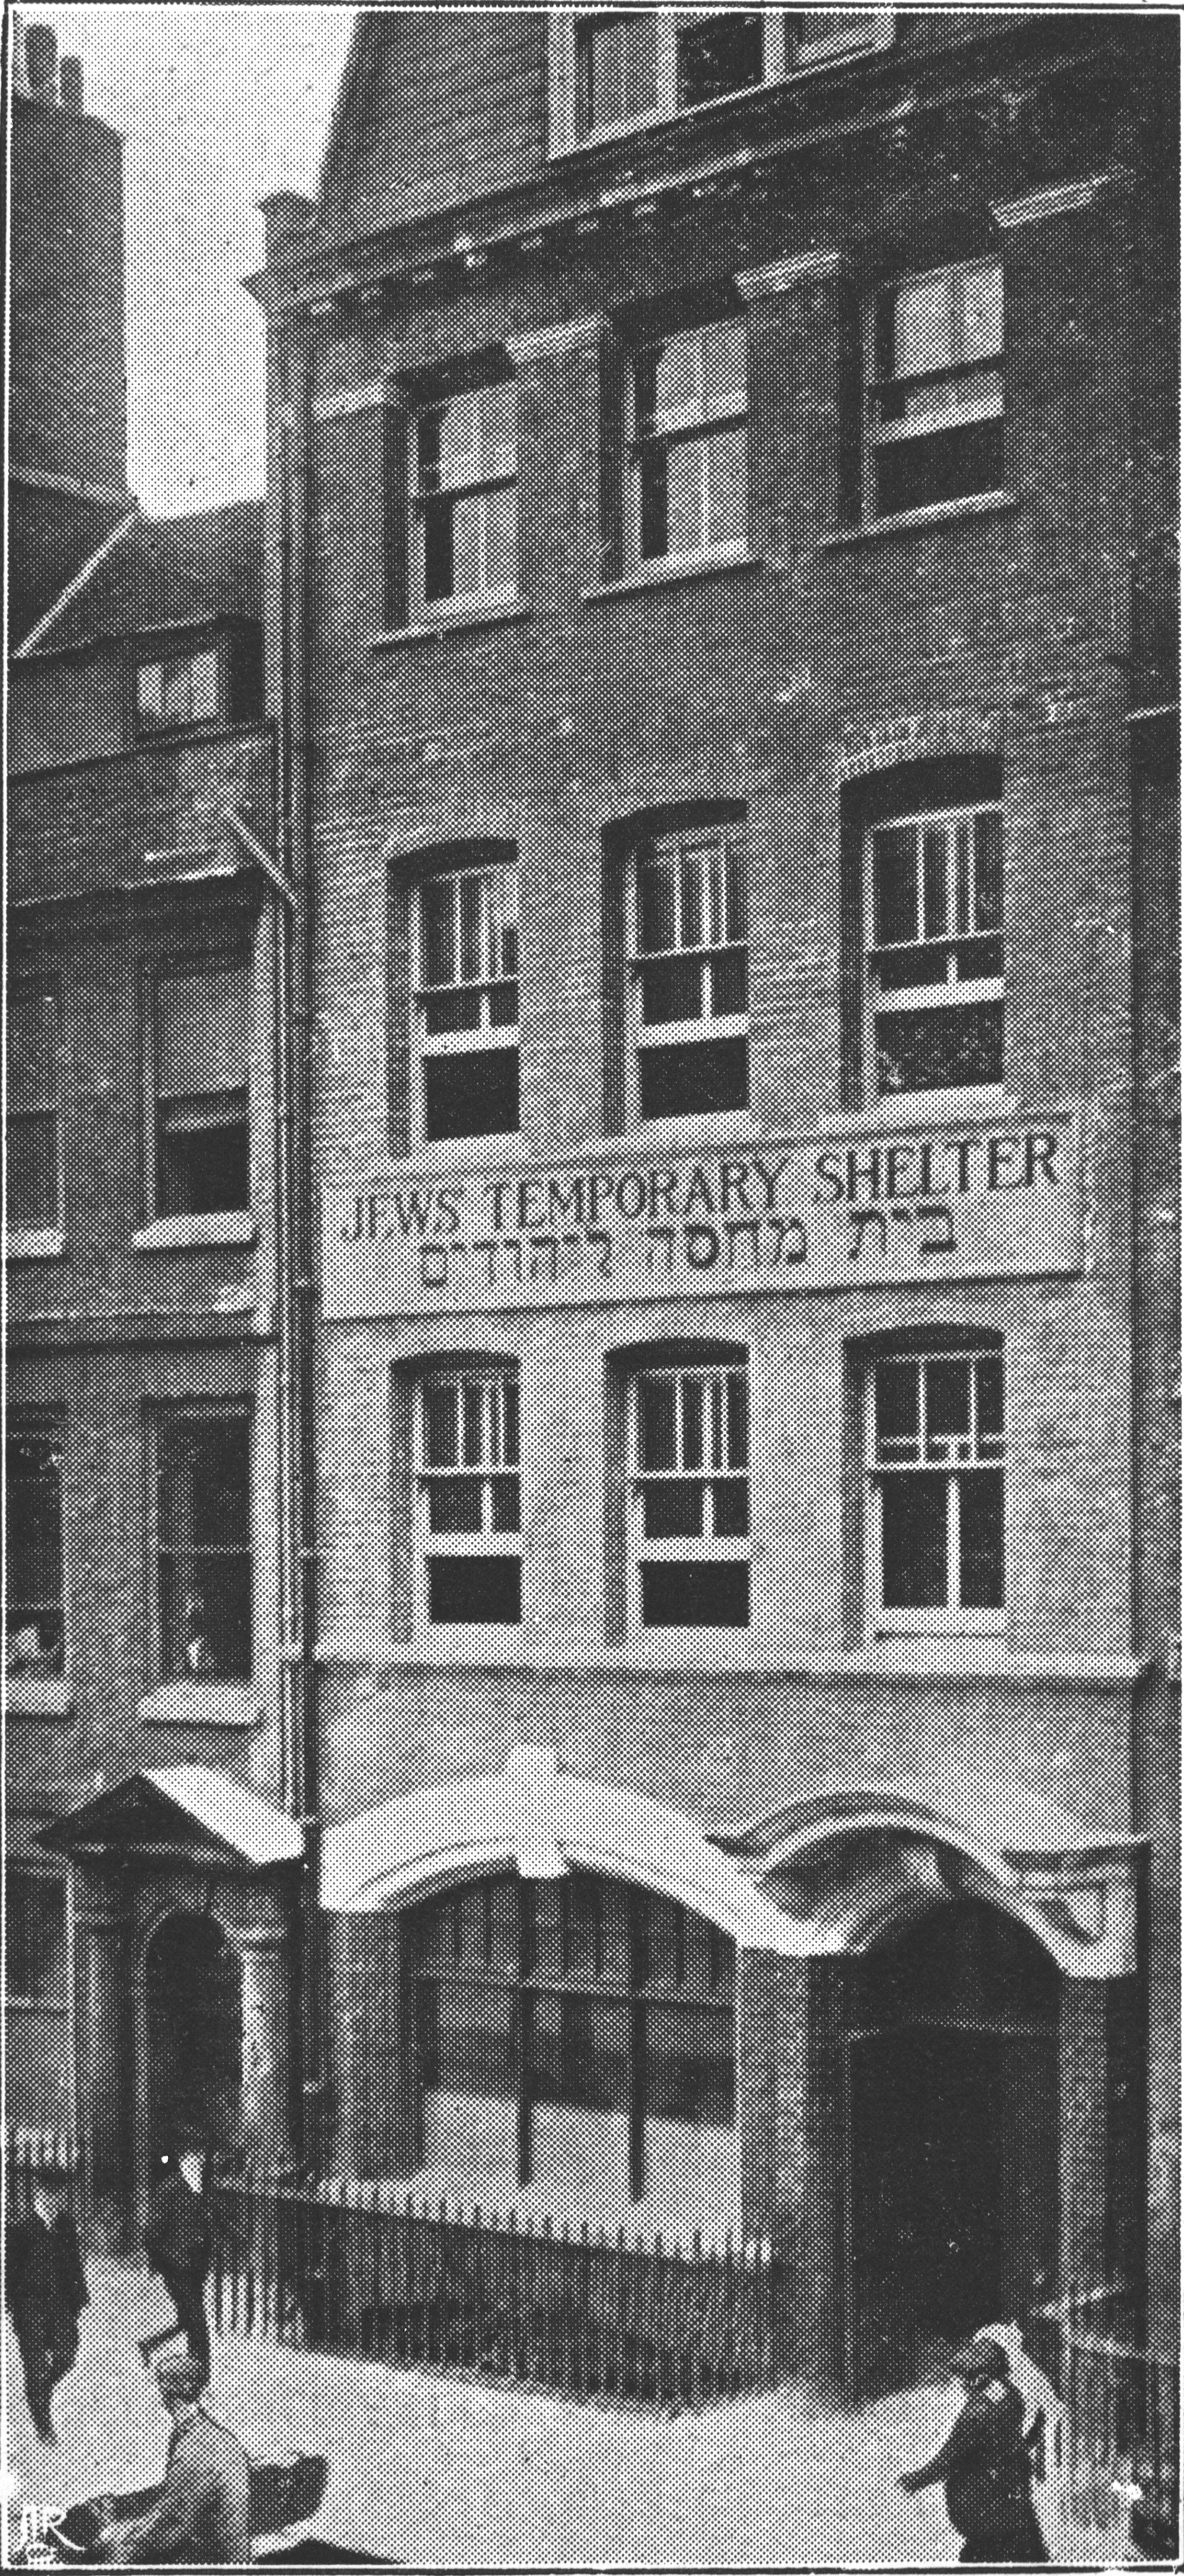 Black and white image of a tall building with a sign saying Jews Temporary Shelter